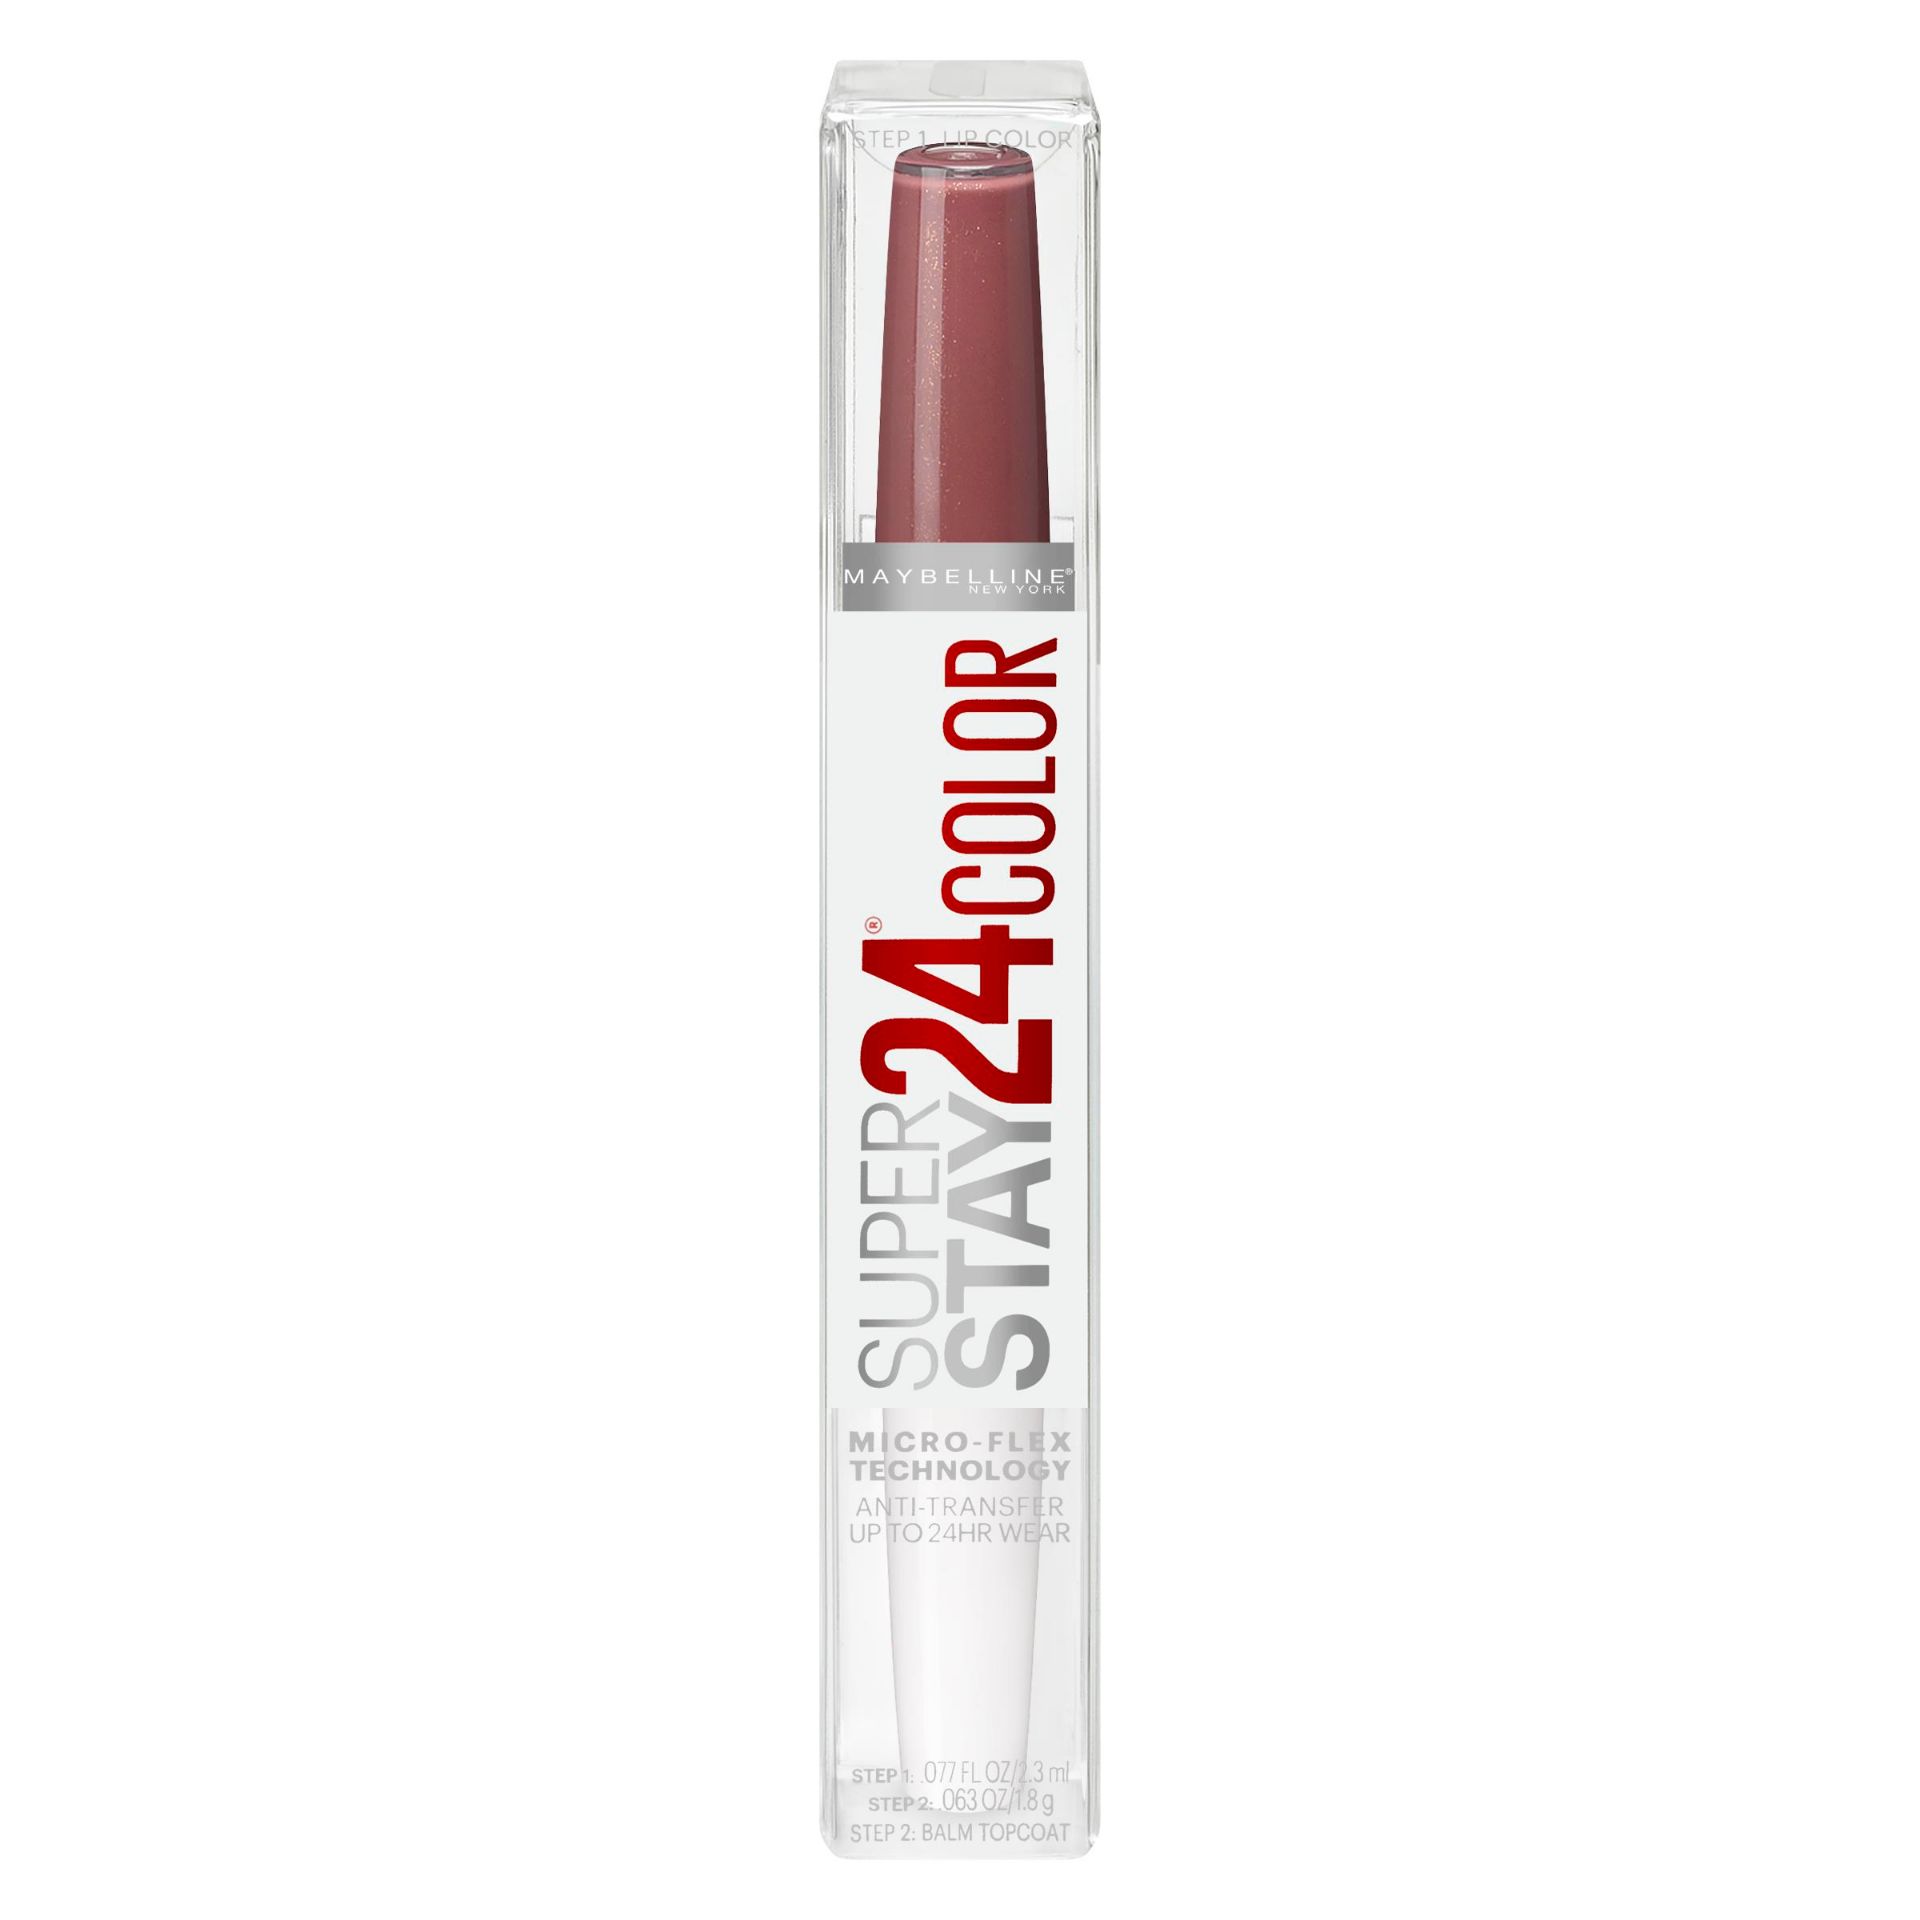 Maybelline® New York SuperStay 24® Lip Color, Constant Cocoa, 0.14 oz